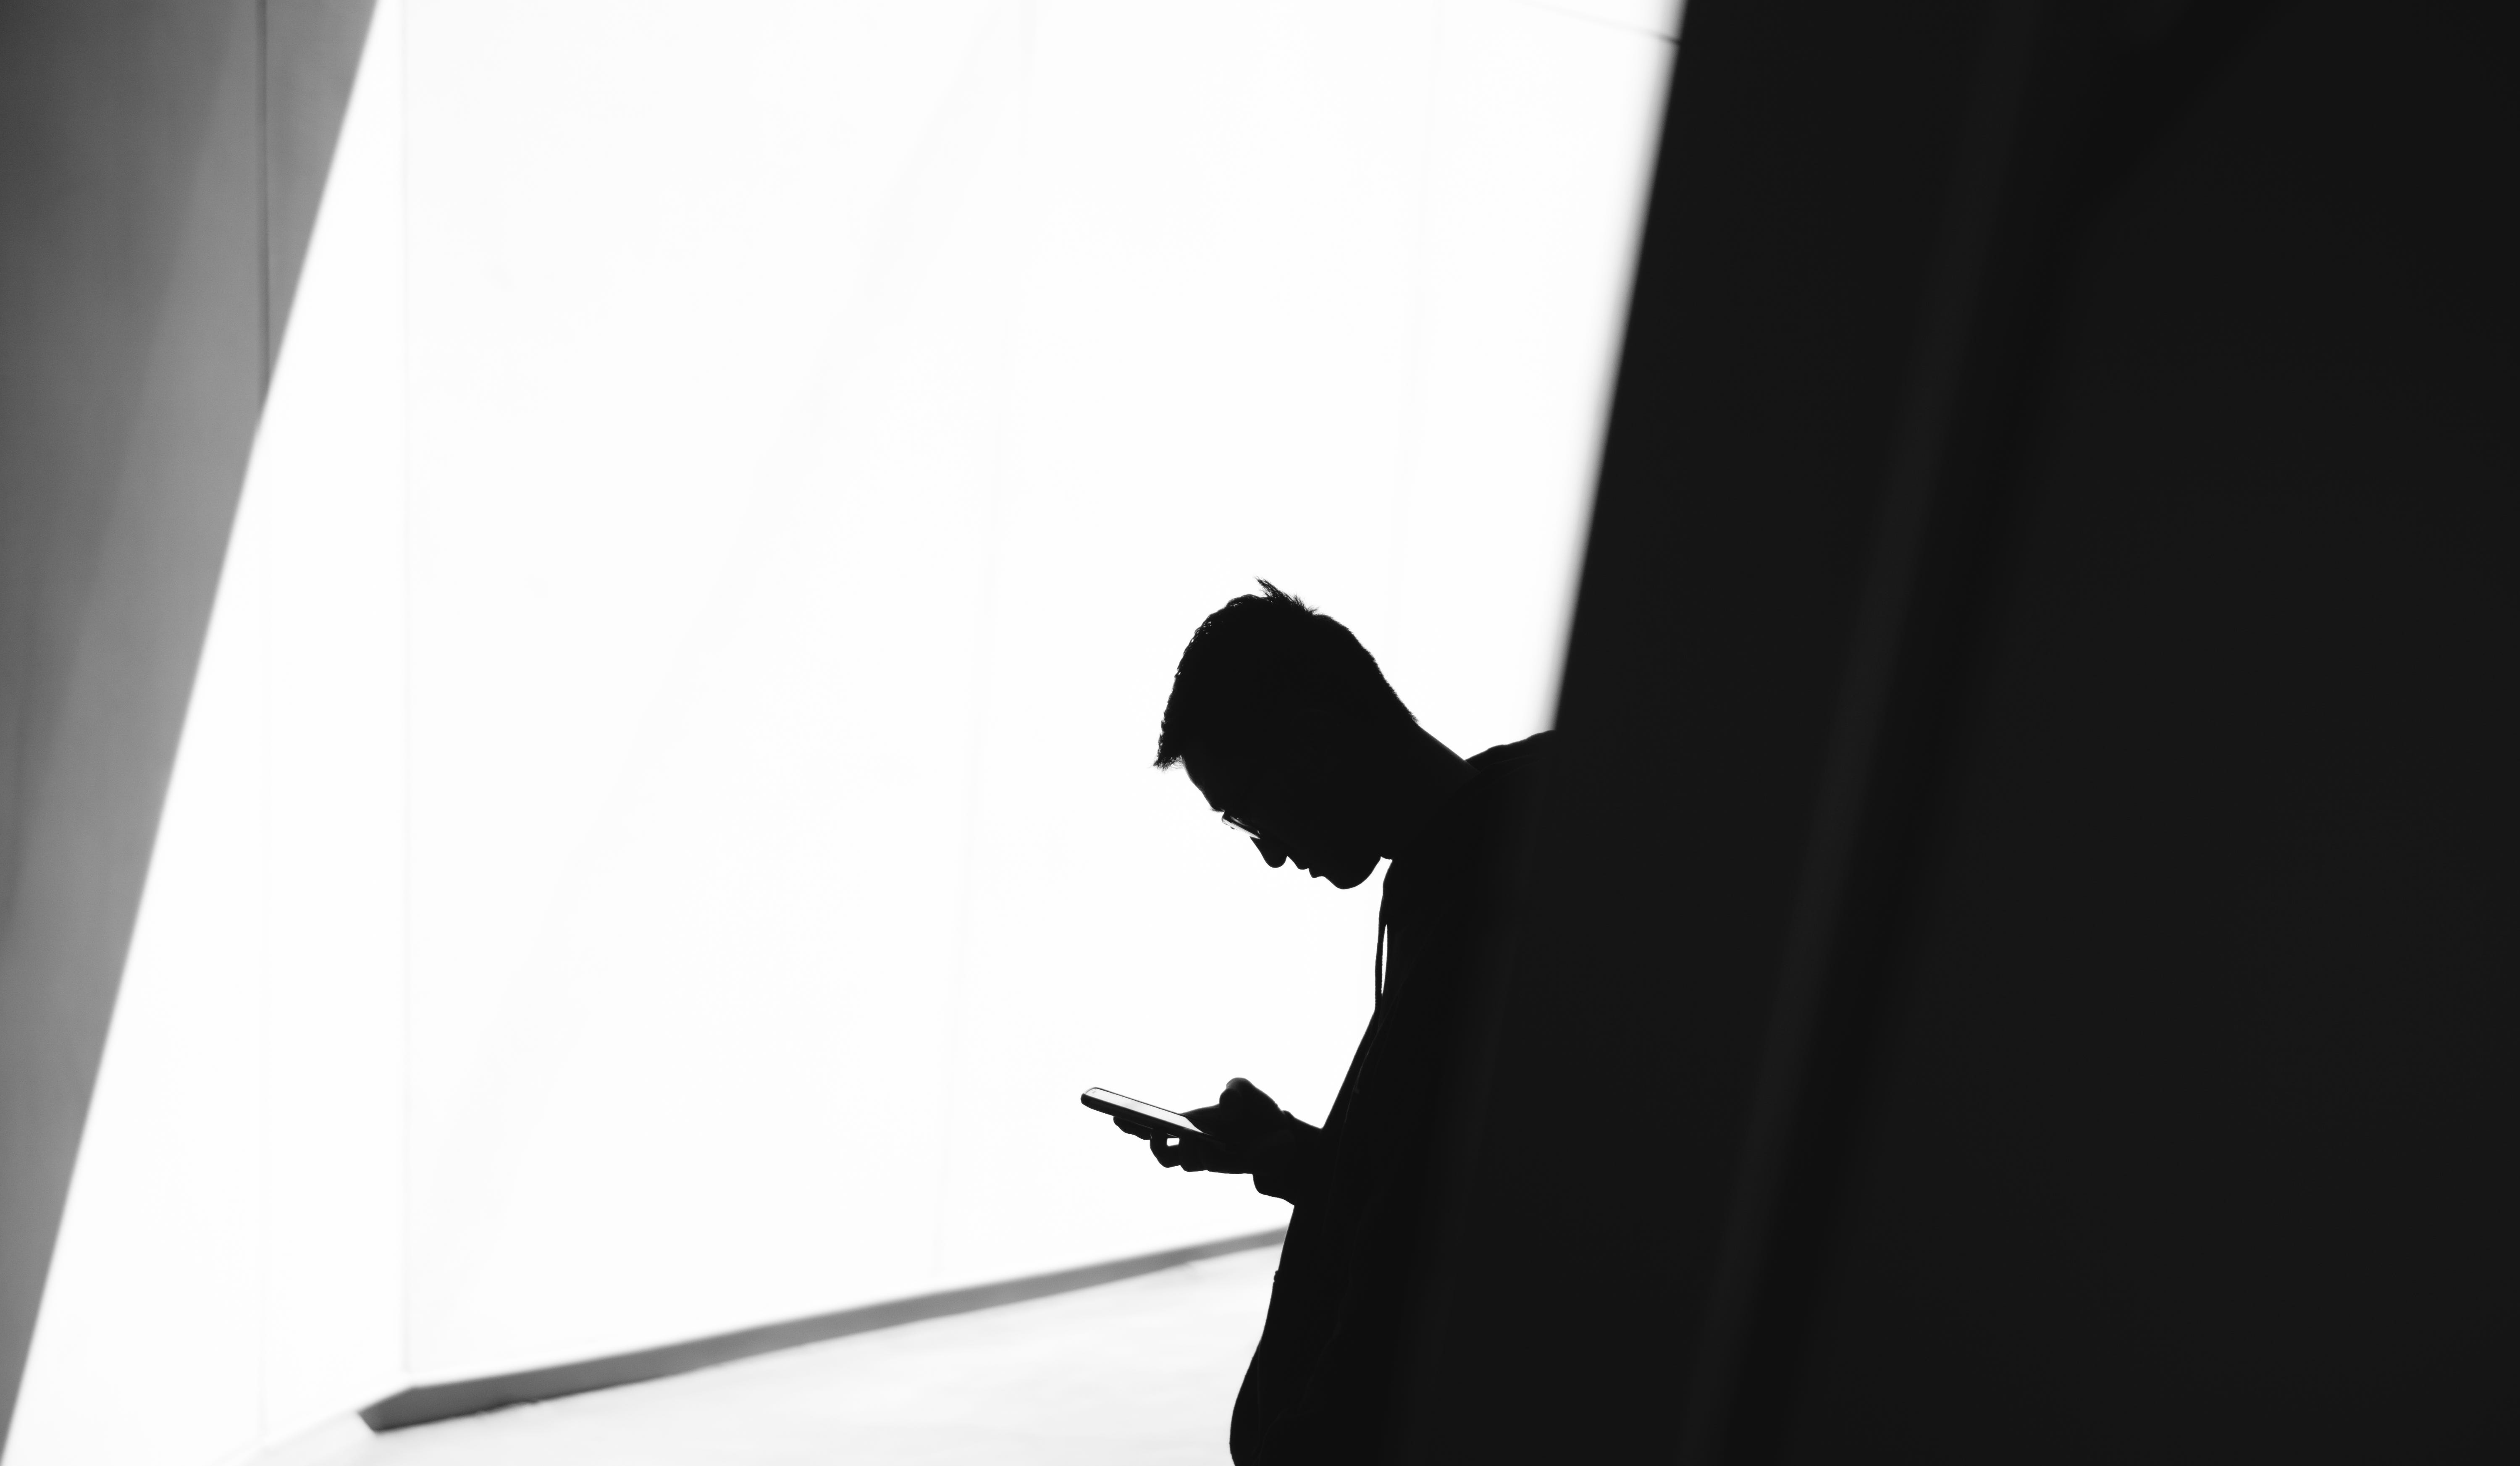 “person using phone leaning on wall in silhouette photography” by <a href="https://unsplash.com/@wflwong?utm_source=medium&amp;utm_medium=referral">Warren Wong</a> on <a href="https://unsplash.com?utm_source=medium&amp;utm_medium=referral">Unsplash</a>